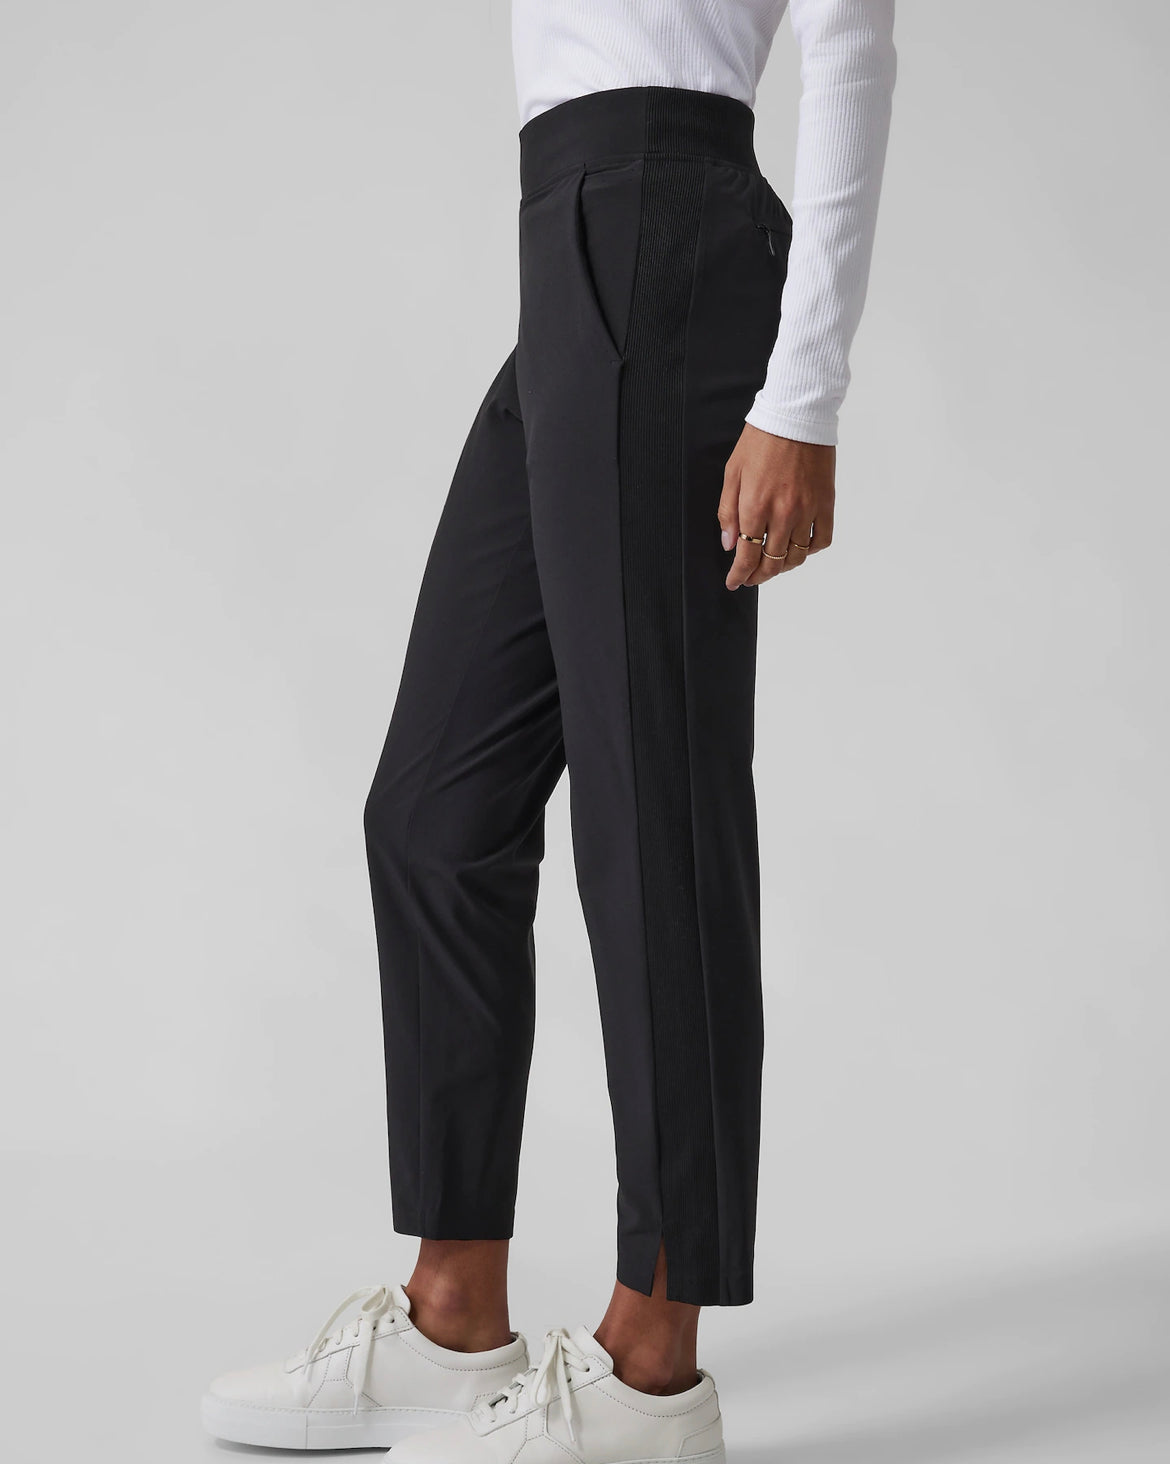 ad #athleta Brooklyn Ankle Pant is so versatile and a wardrobe staple, brooklyn ankle pants